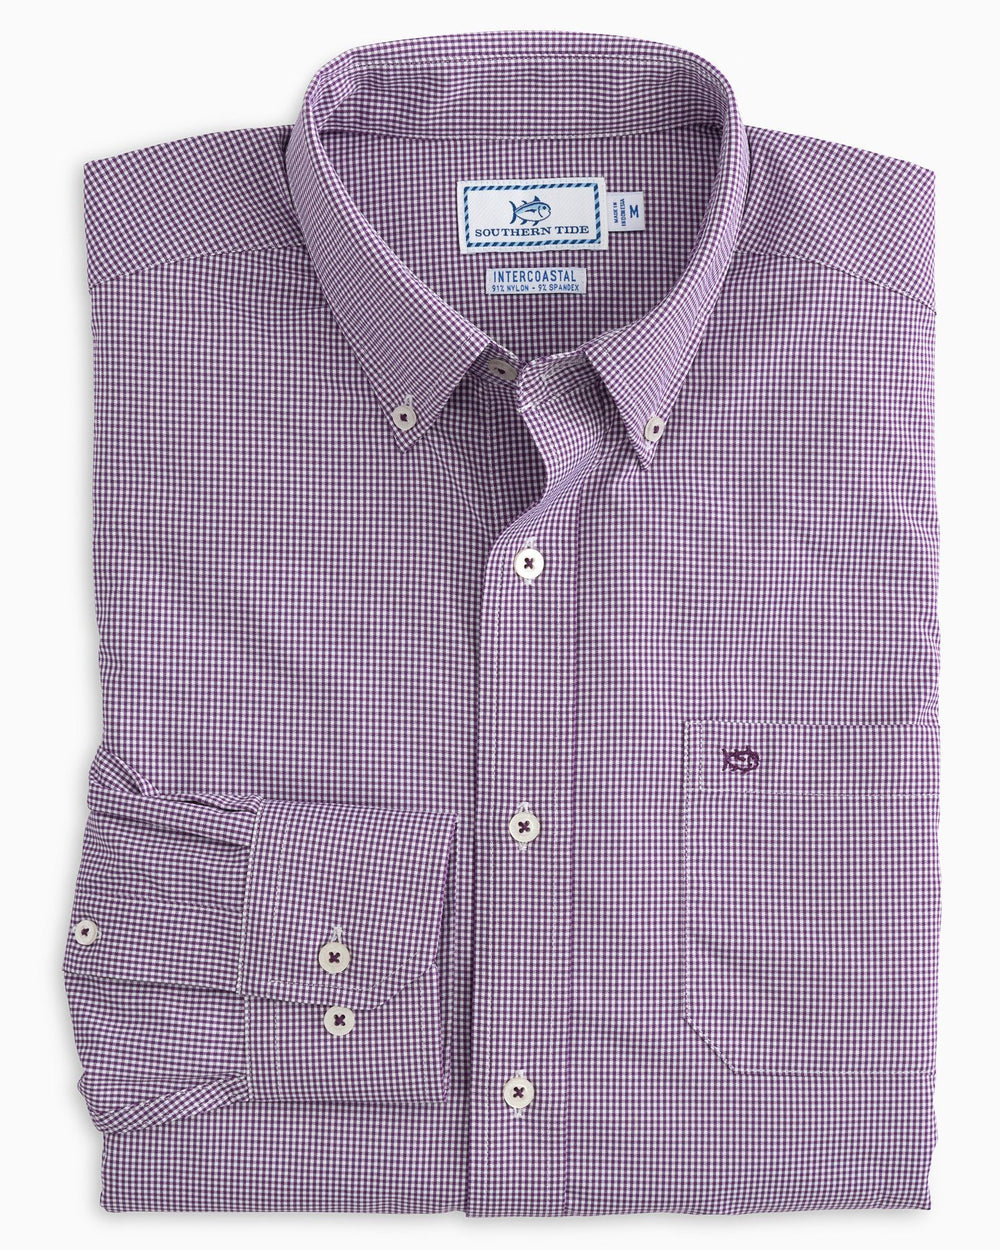 The front view of the Men's Purple Micro Gingham Intercoastal Performance Sport Shirt by Southern Tide - royal purple